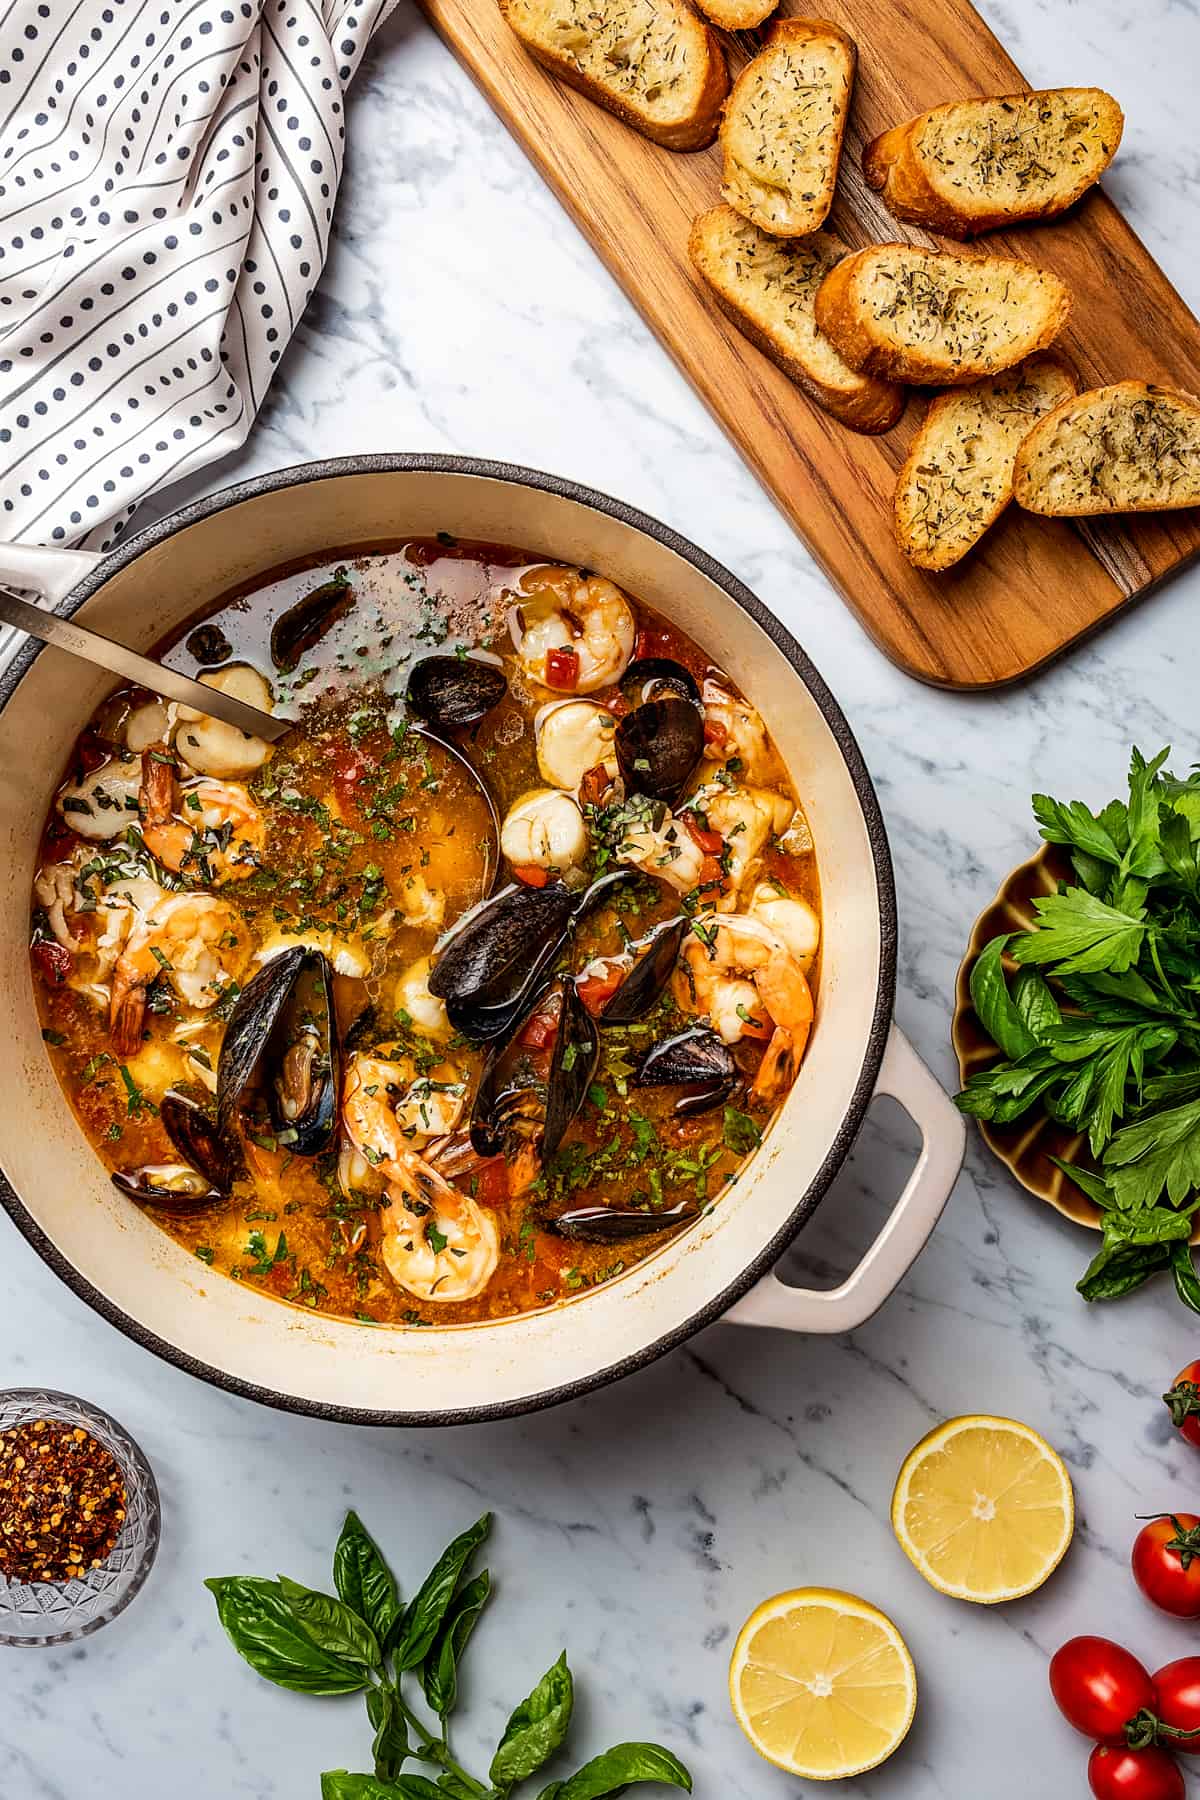 Overhead shot of seafood stew in a pot, next to a cutting board of toasted baguette slices. Various other ingredients are arranged on the work surface.